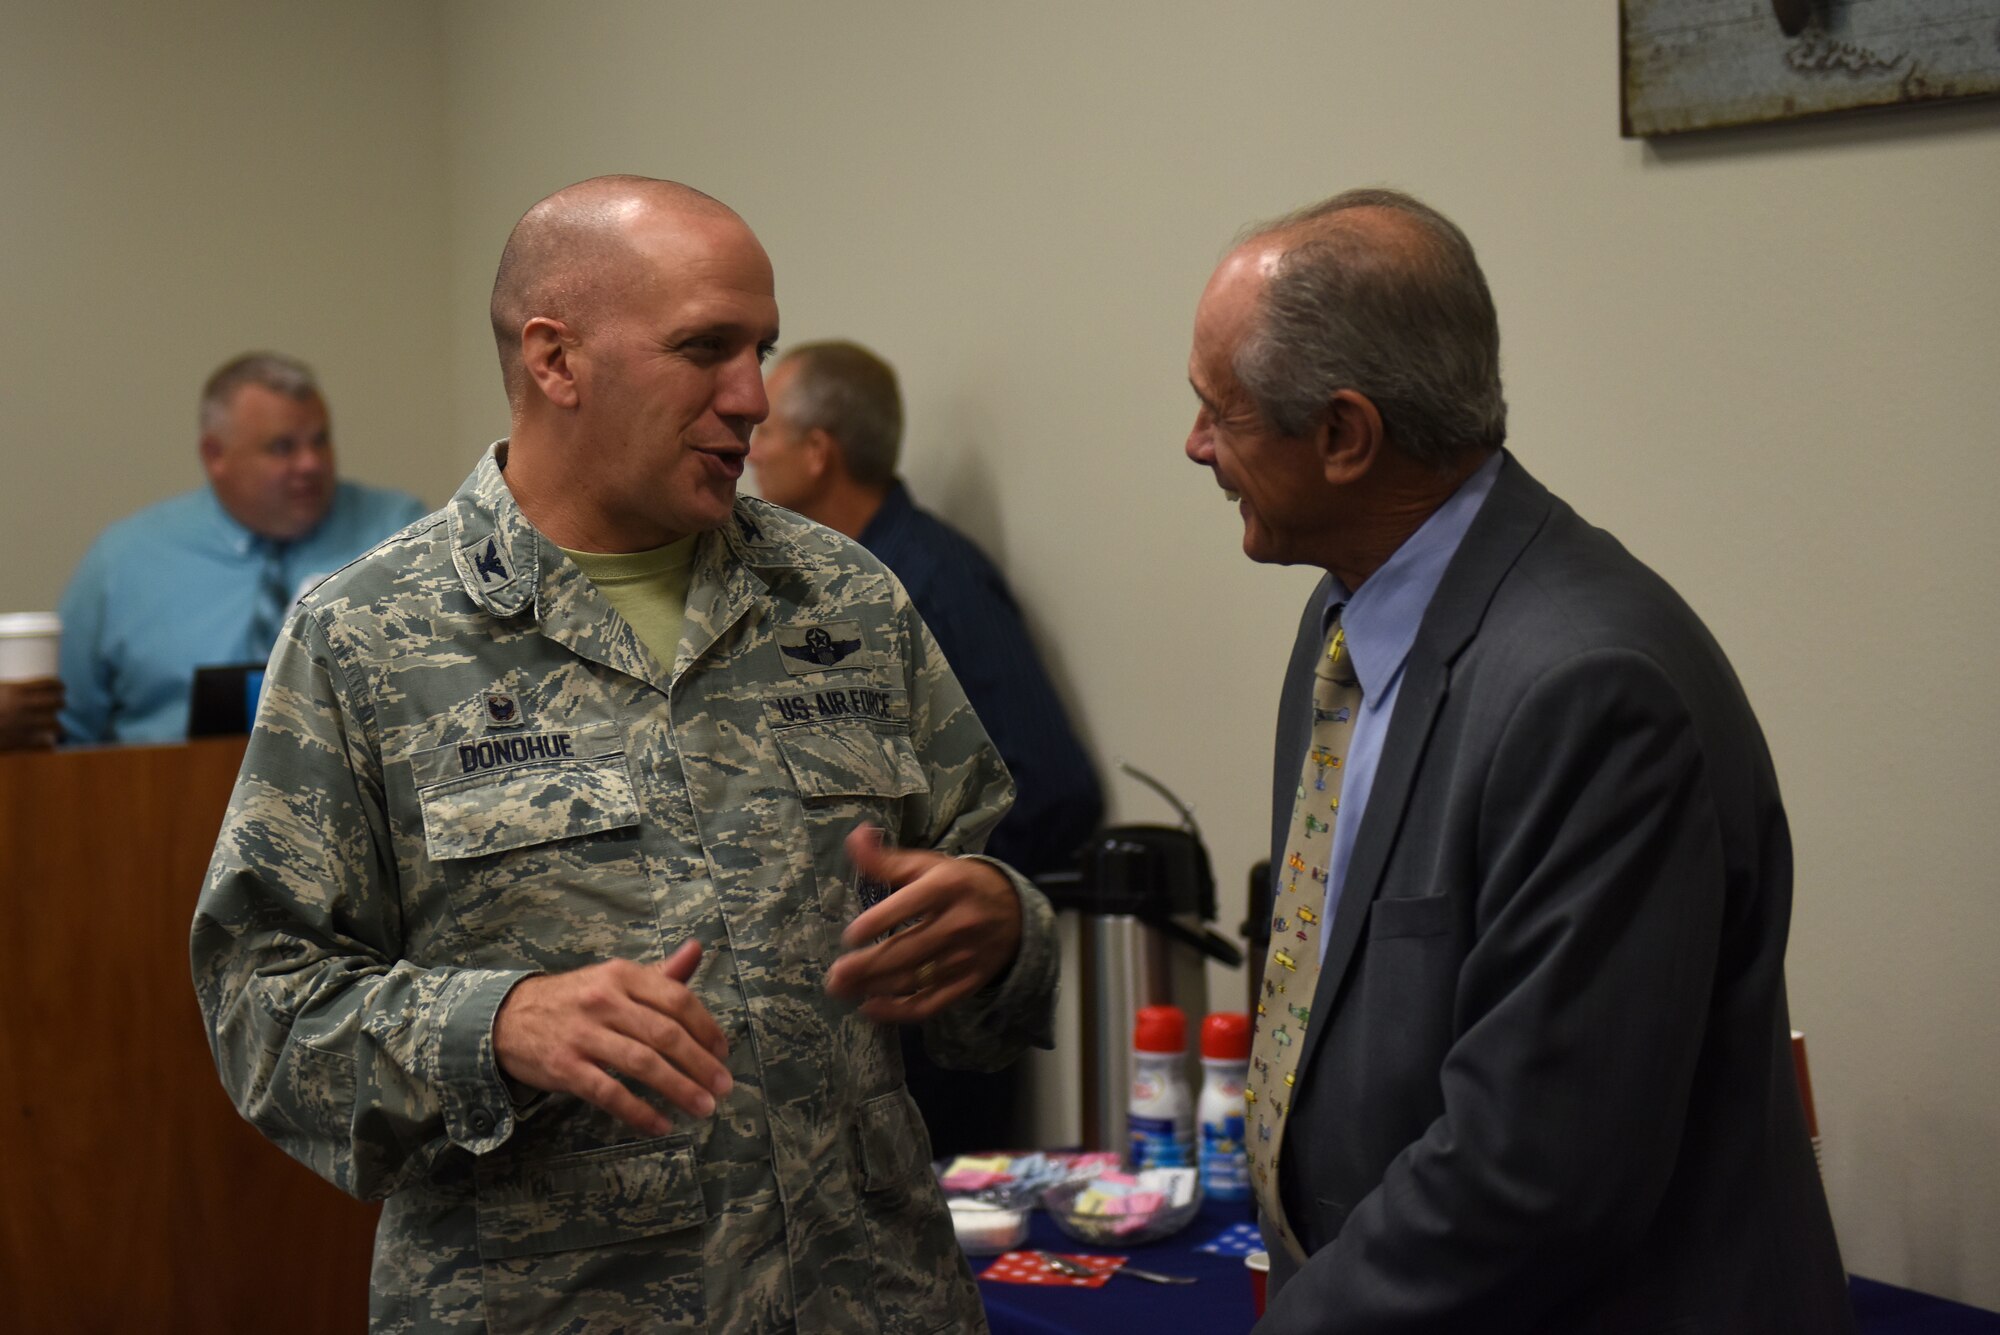 A man in the Airman Battle Uniform talks to a man in a suit.